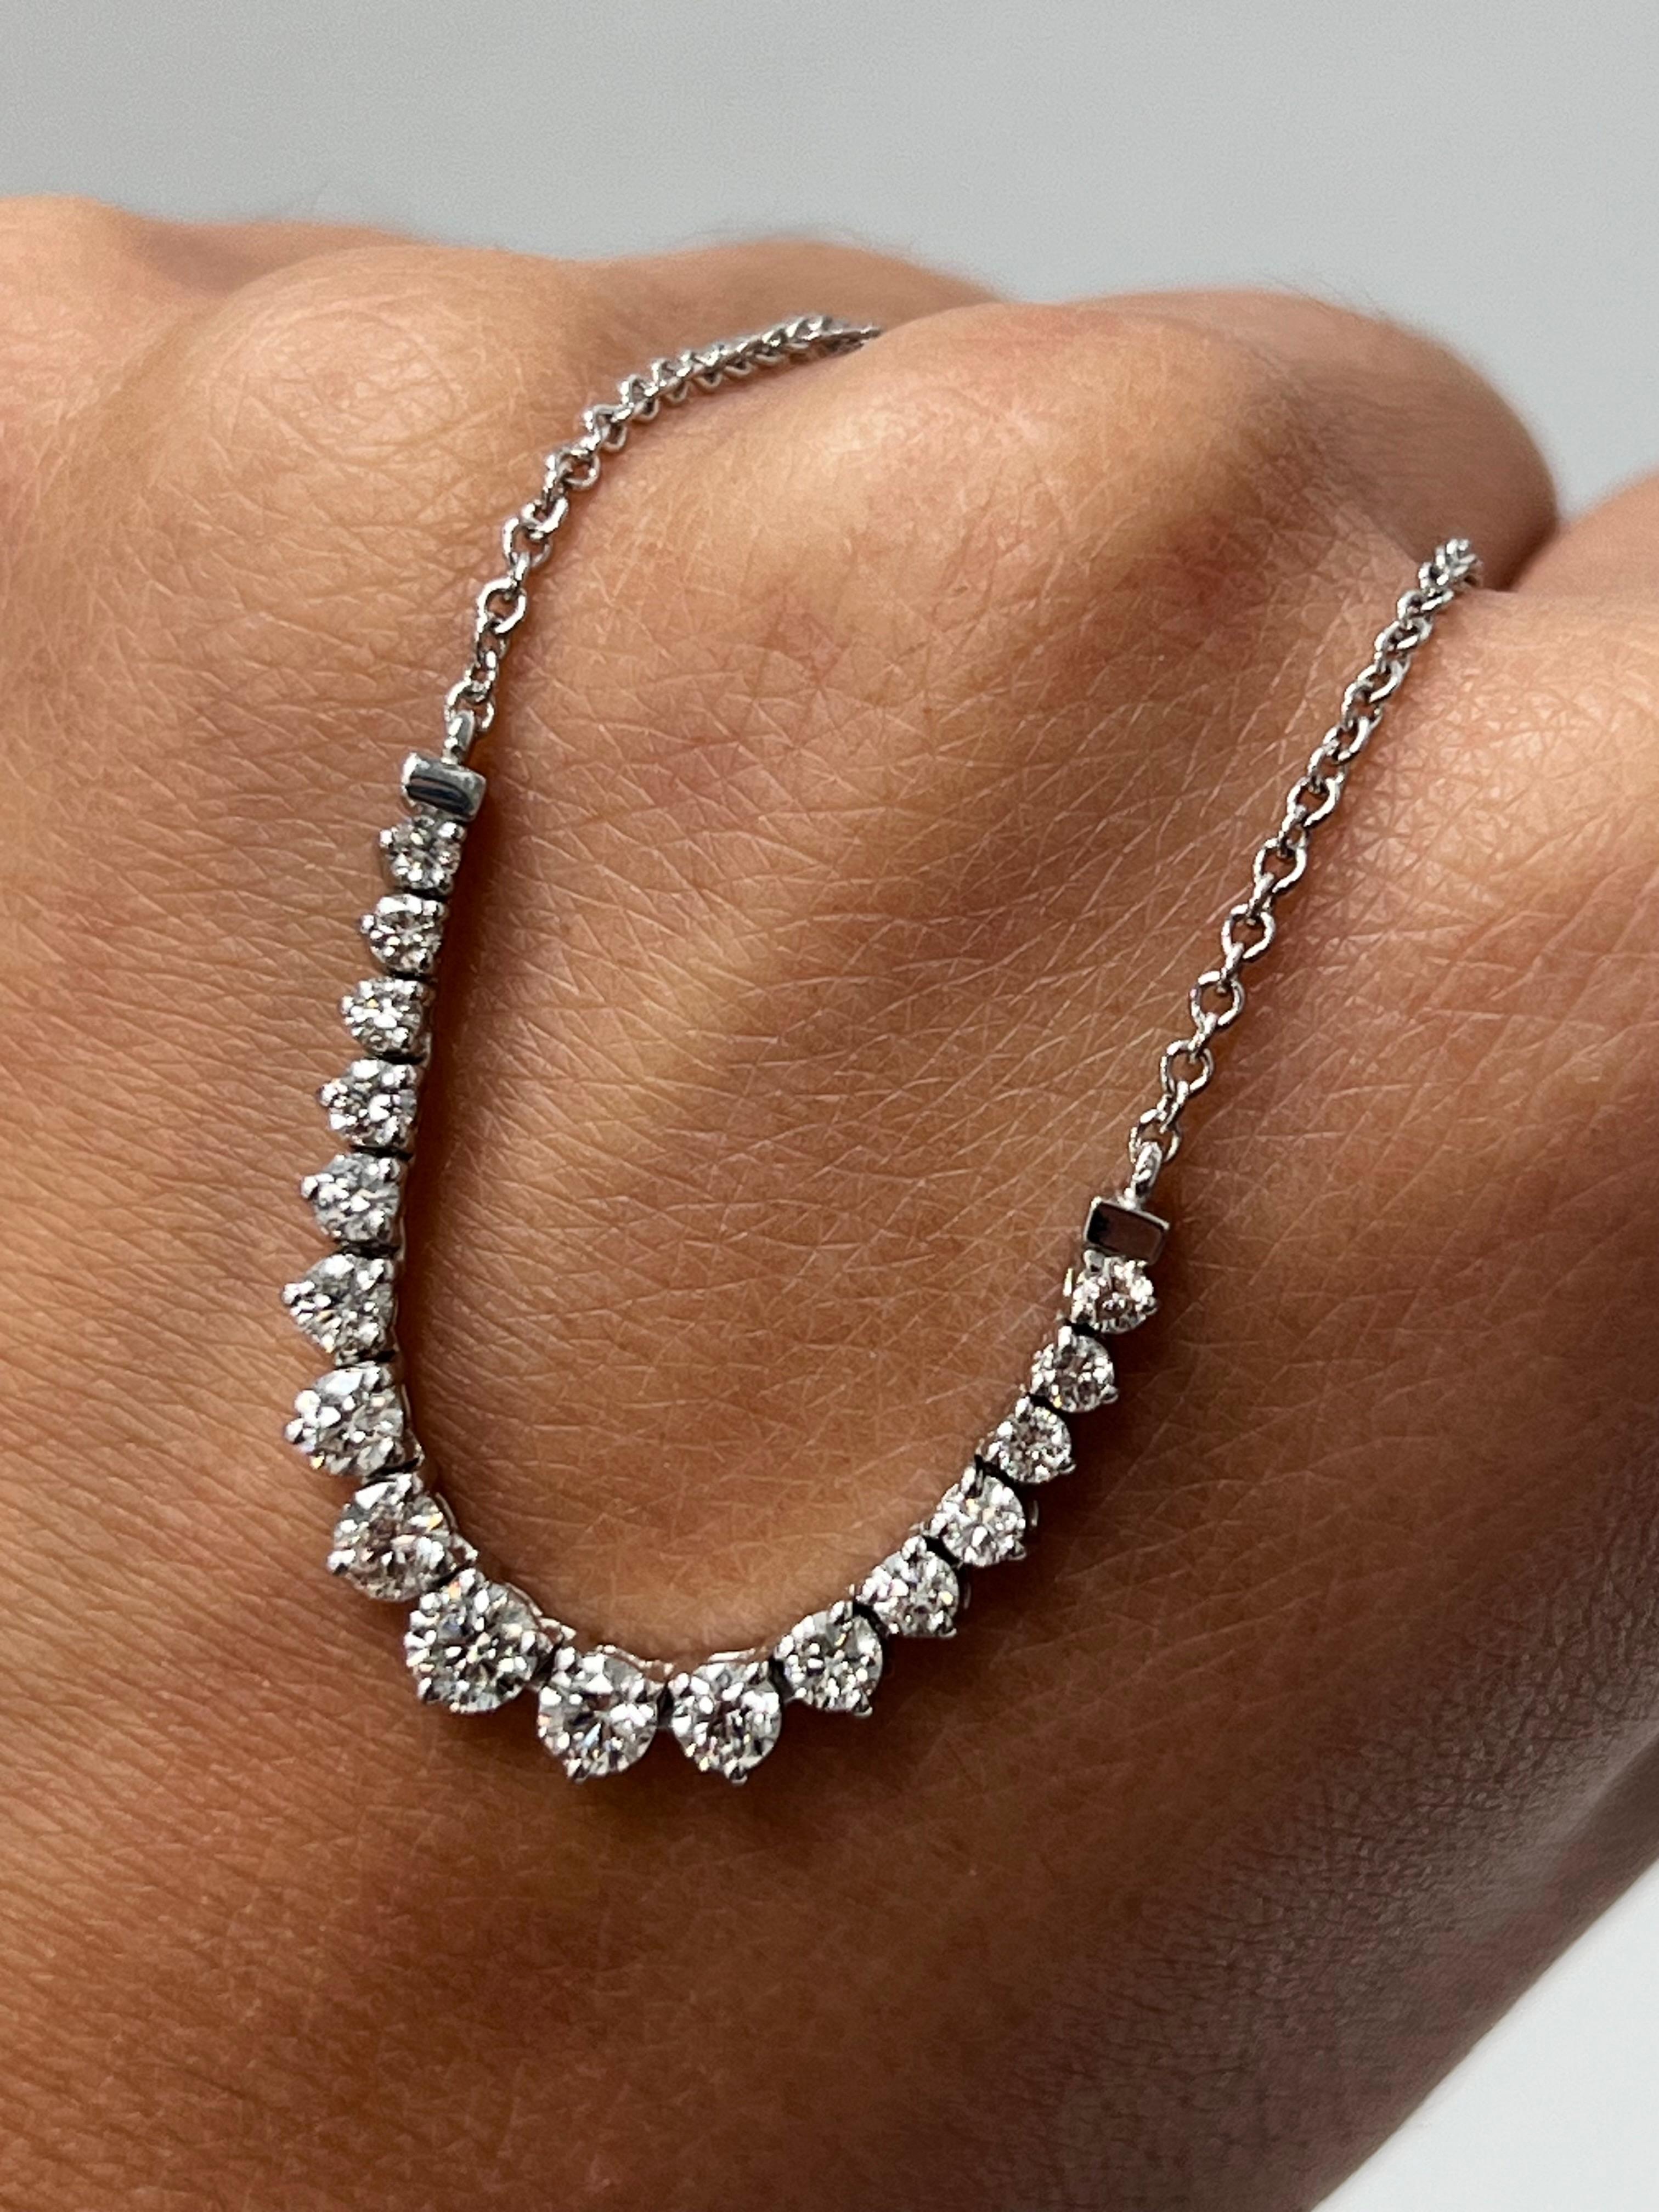 With this exquisite single-row white gold diamond necklace, style and glamour are in the spotlight. This 14-karat necklace is made from a total of 17 round diamonds totaling 1.15 carats, all in SI1-SI2, GH color. This classic look is timeless and is